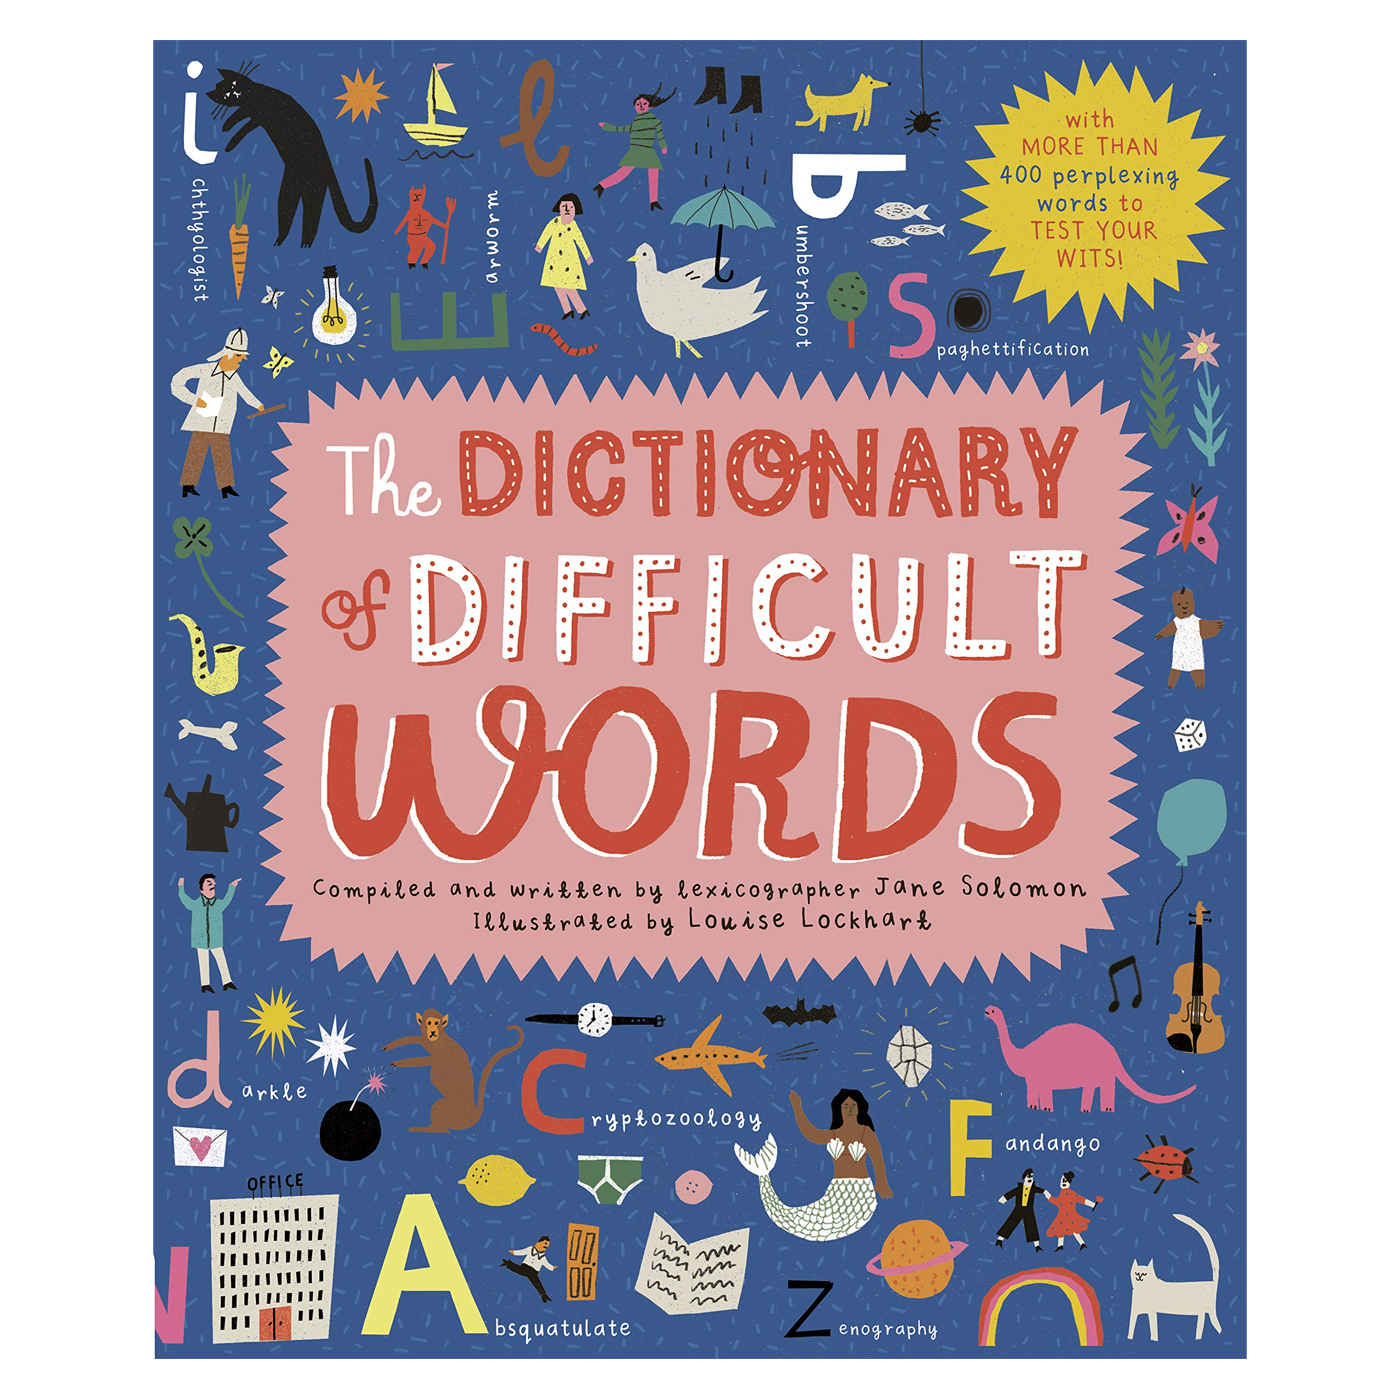  The Dictionary of Difficult Words